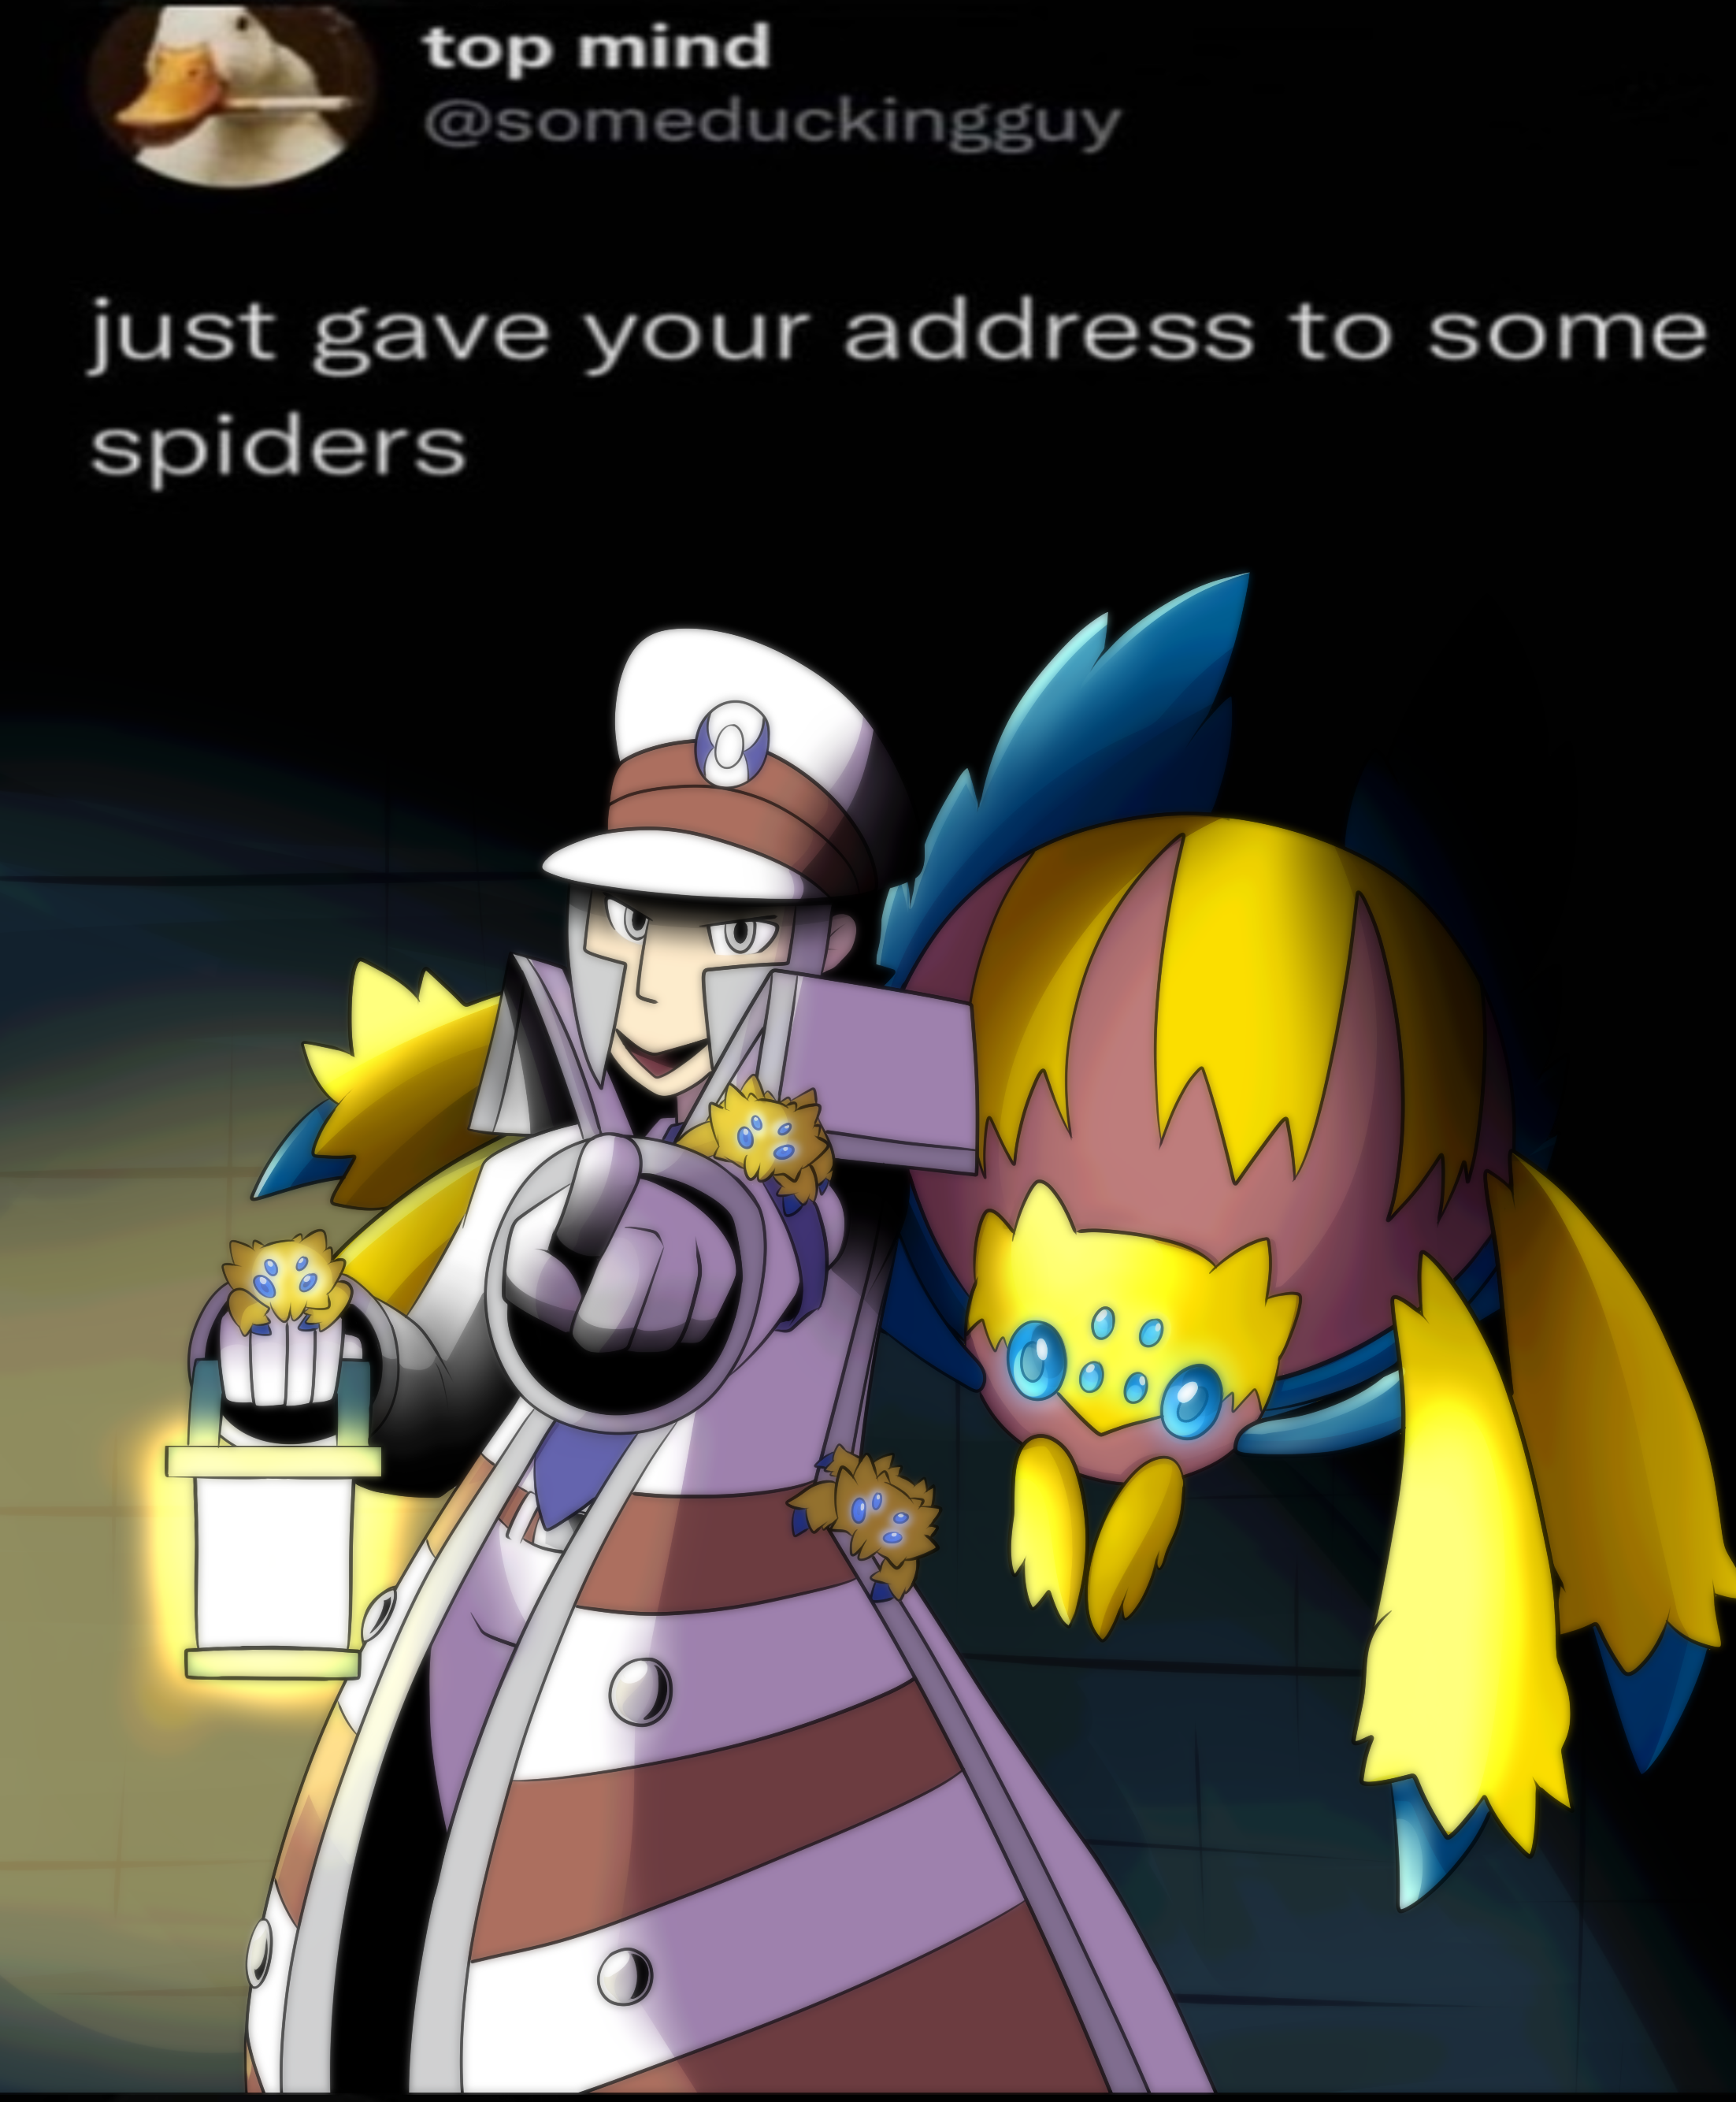 Get ready for the spiders